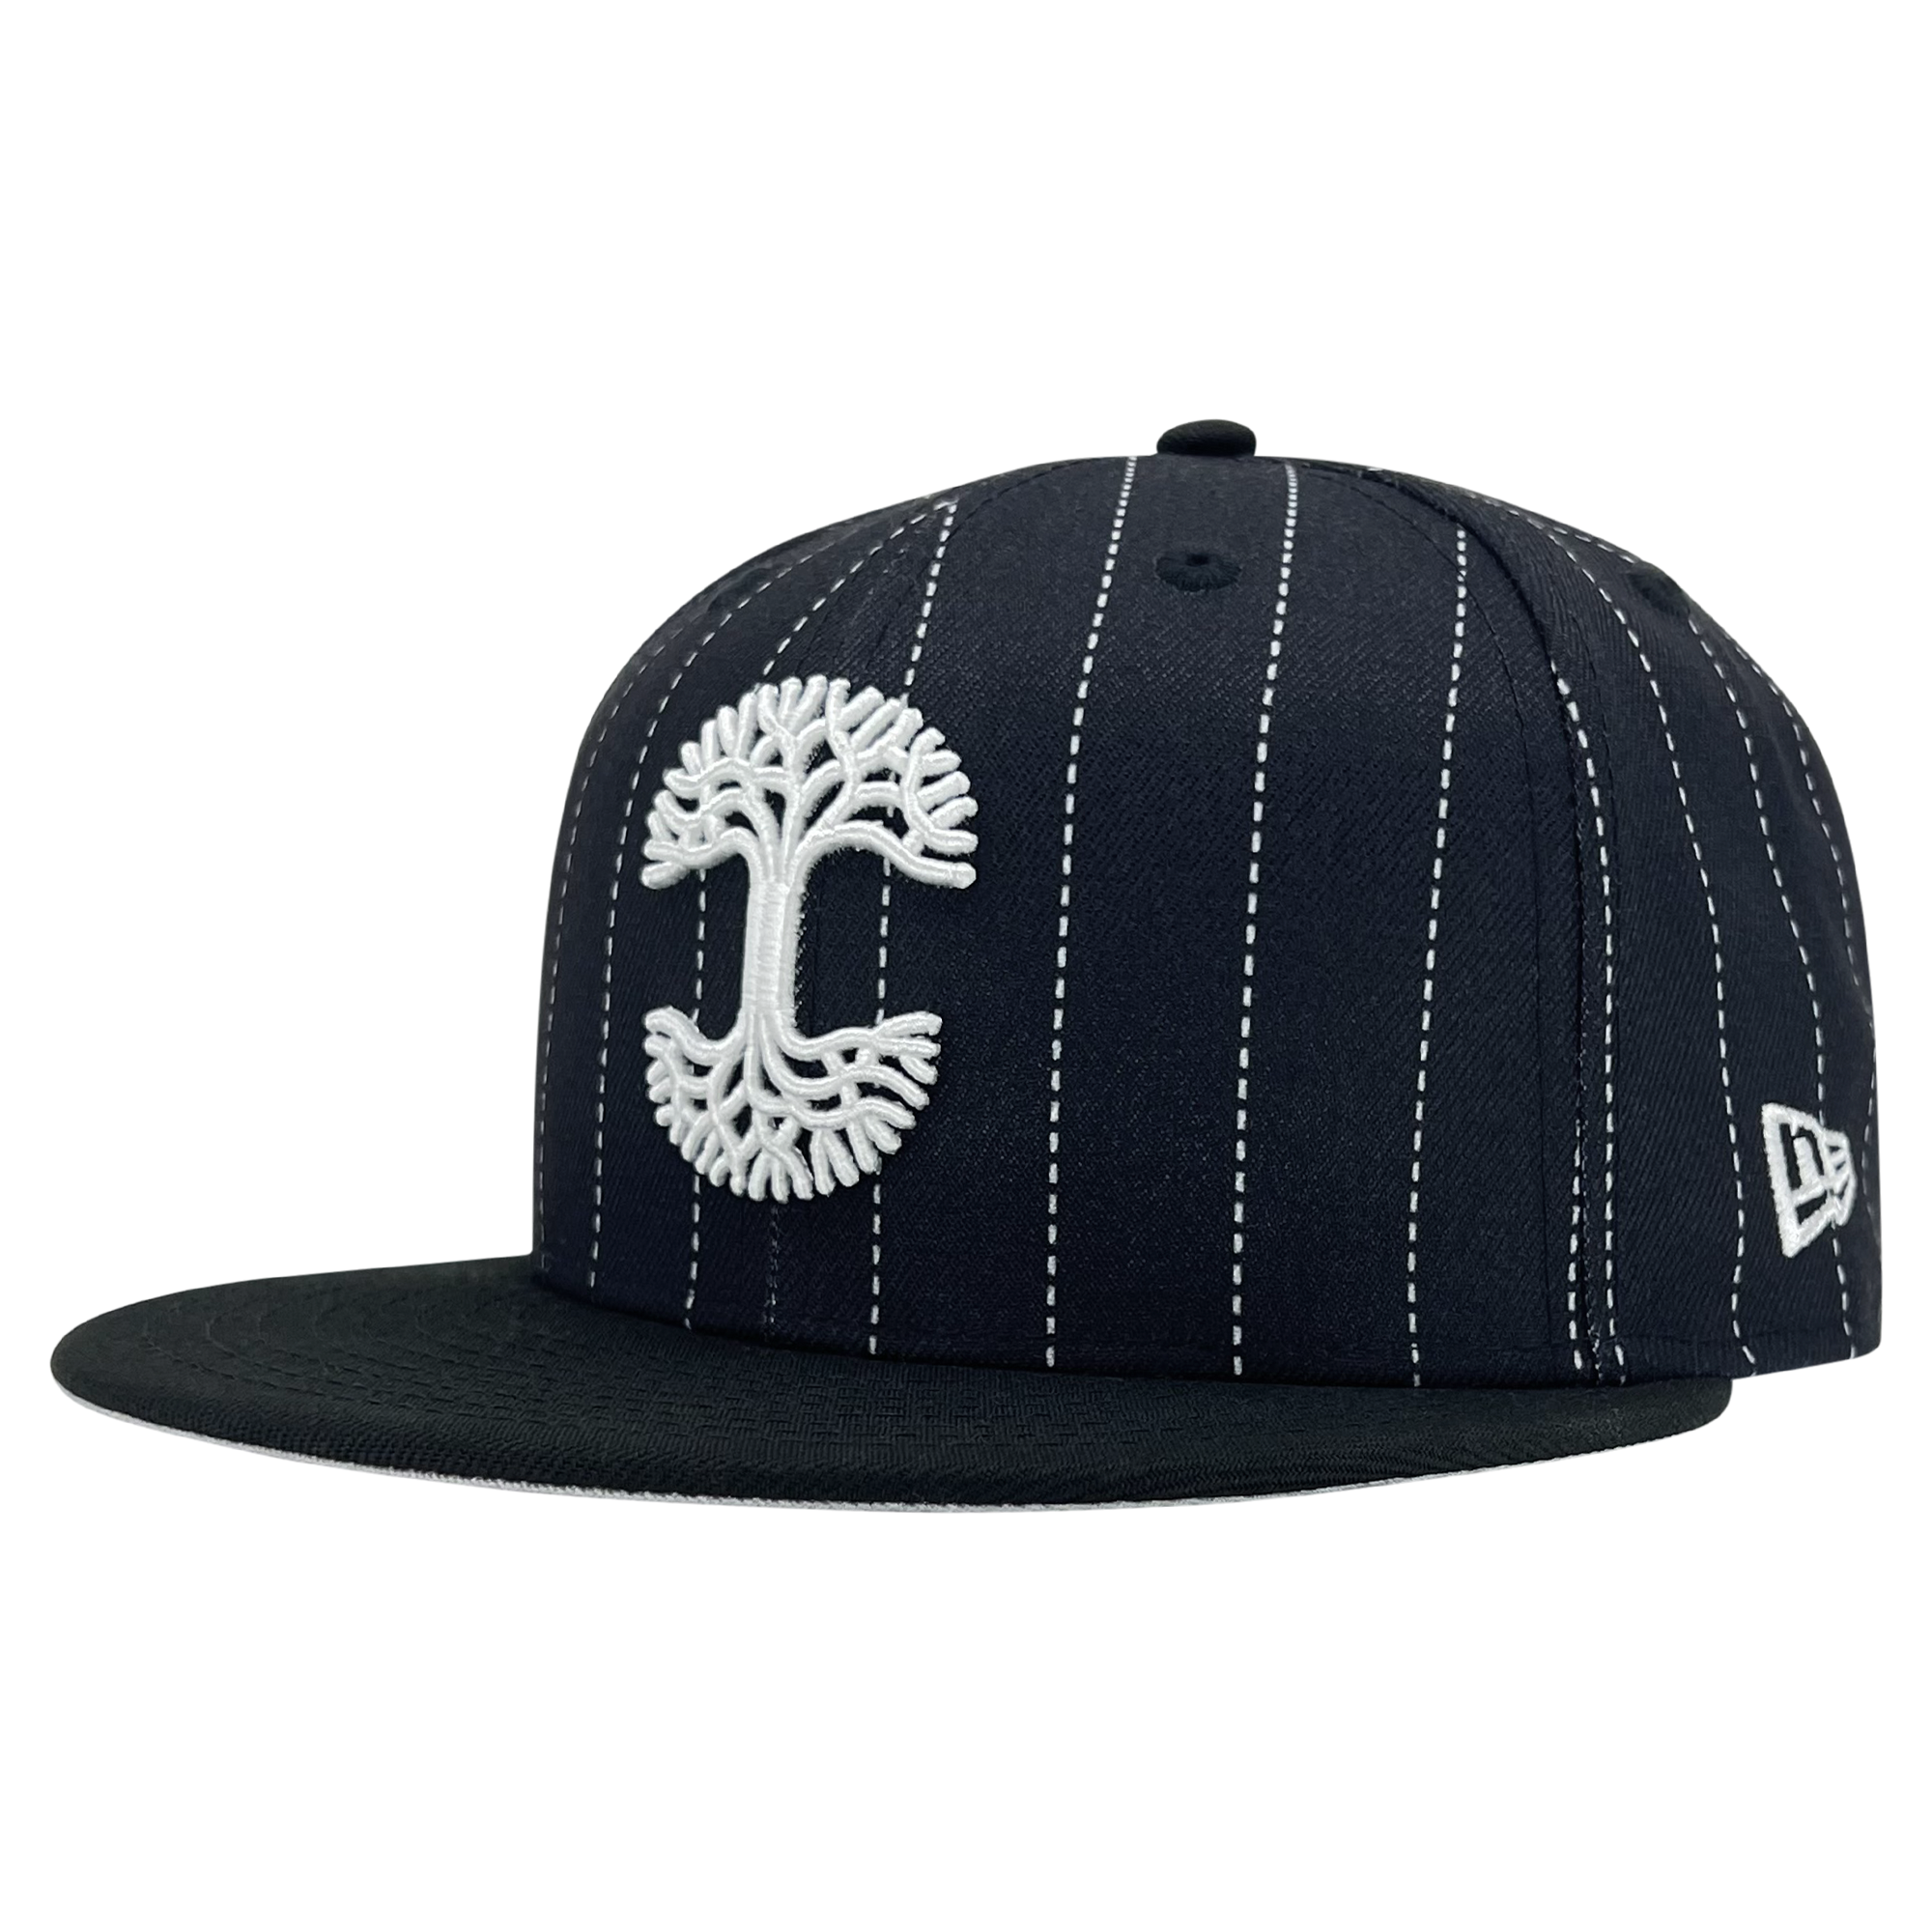 New Era 59FIFTY black pinstripe fitted hat with white embroidered Oaklandish tree logo-angled to show New Era logo on left wear side.